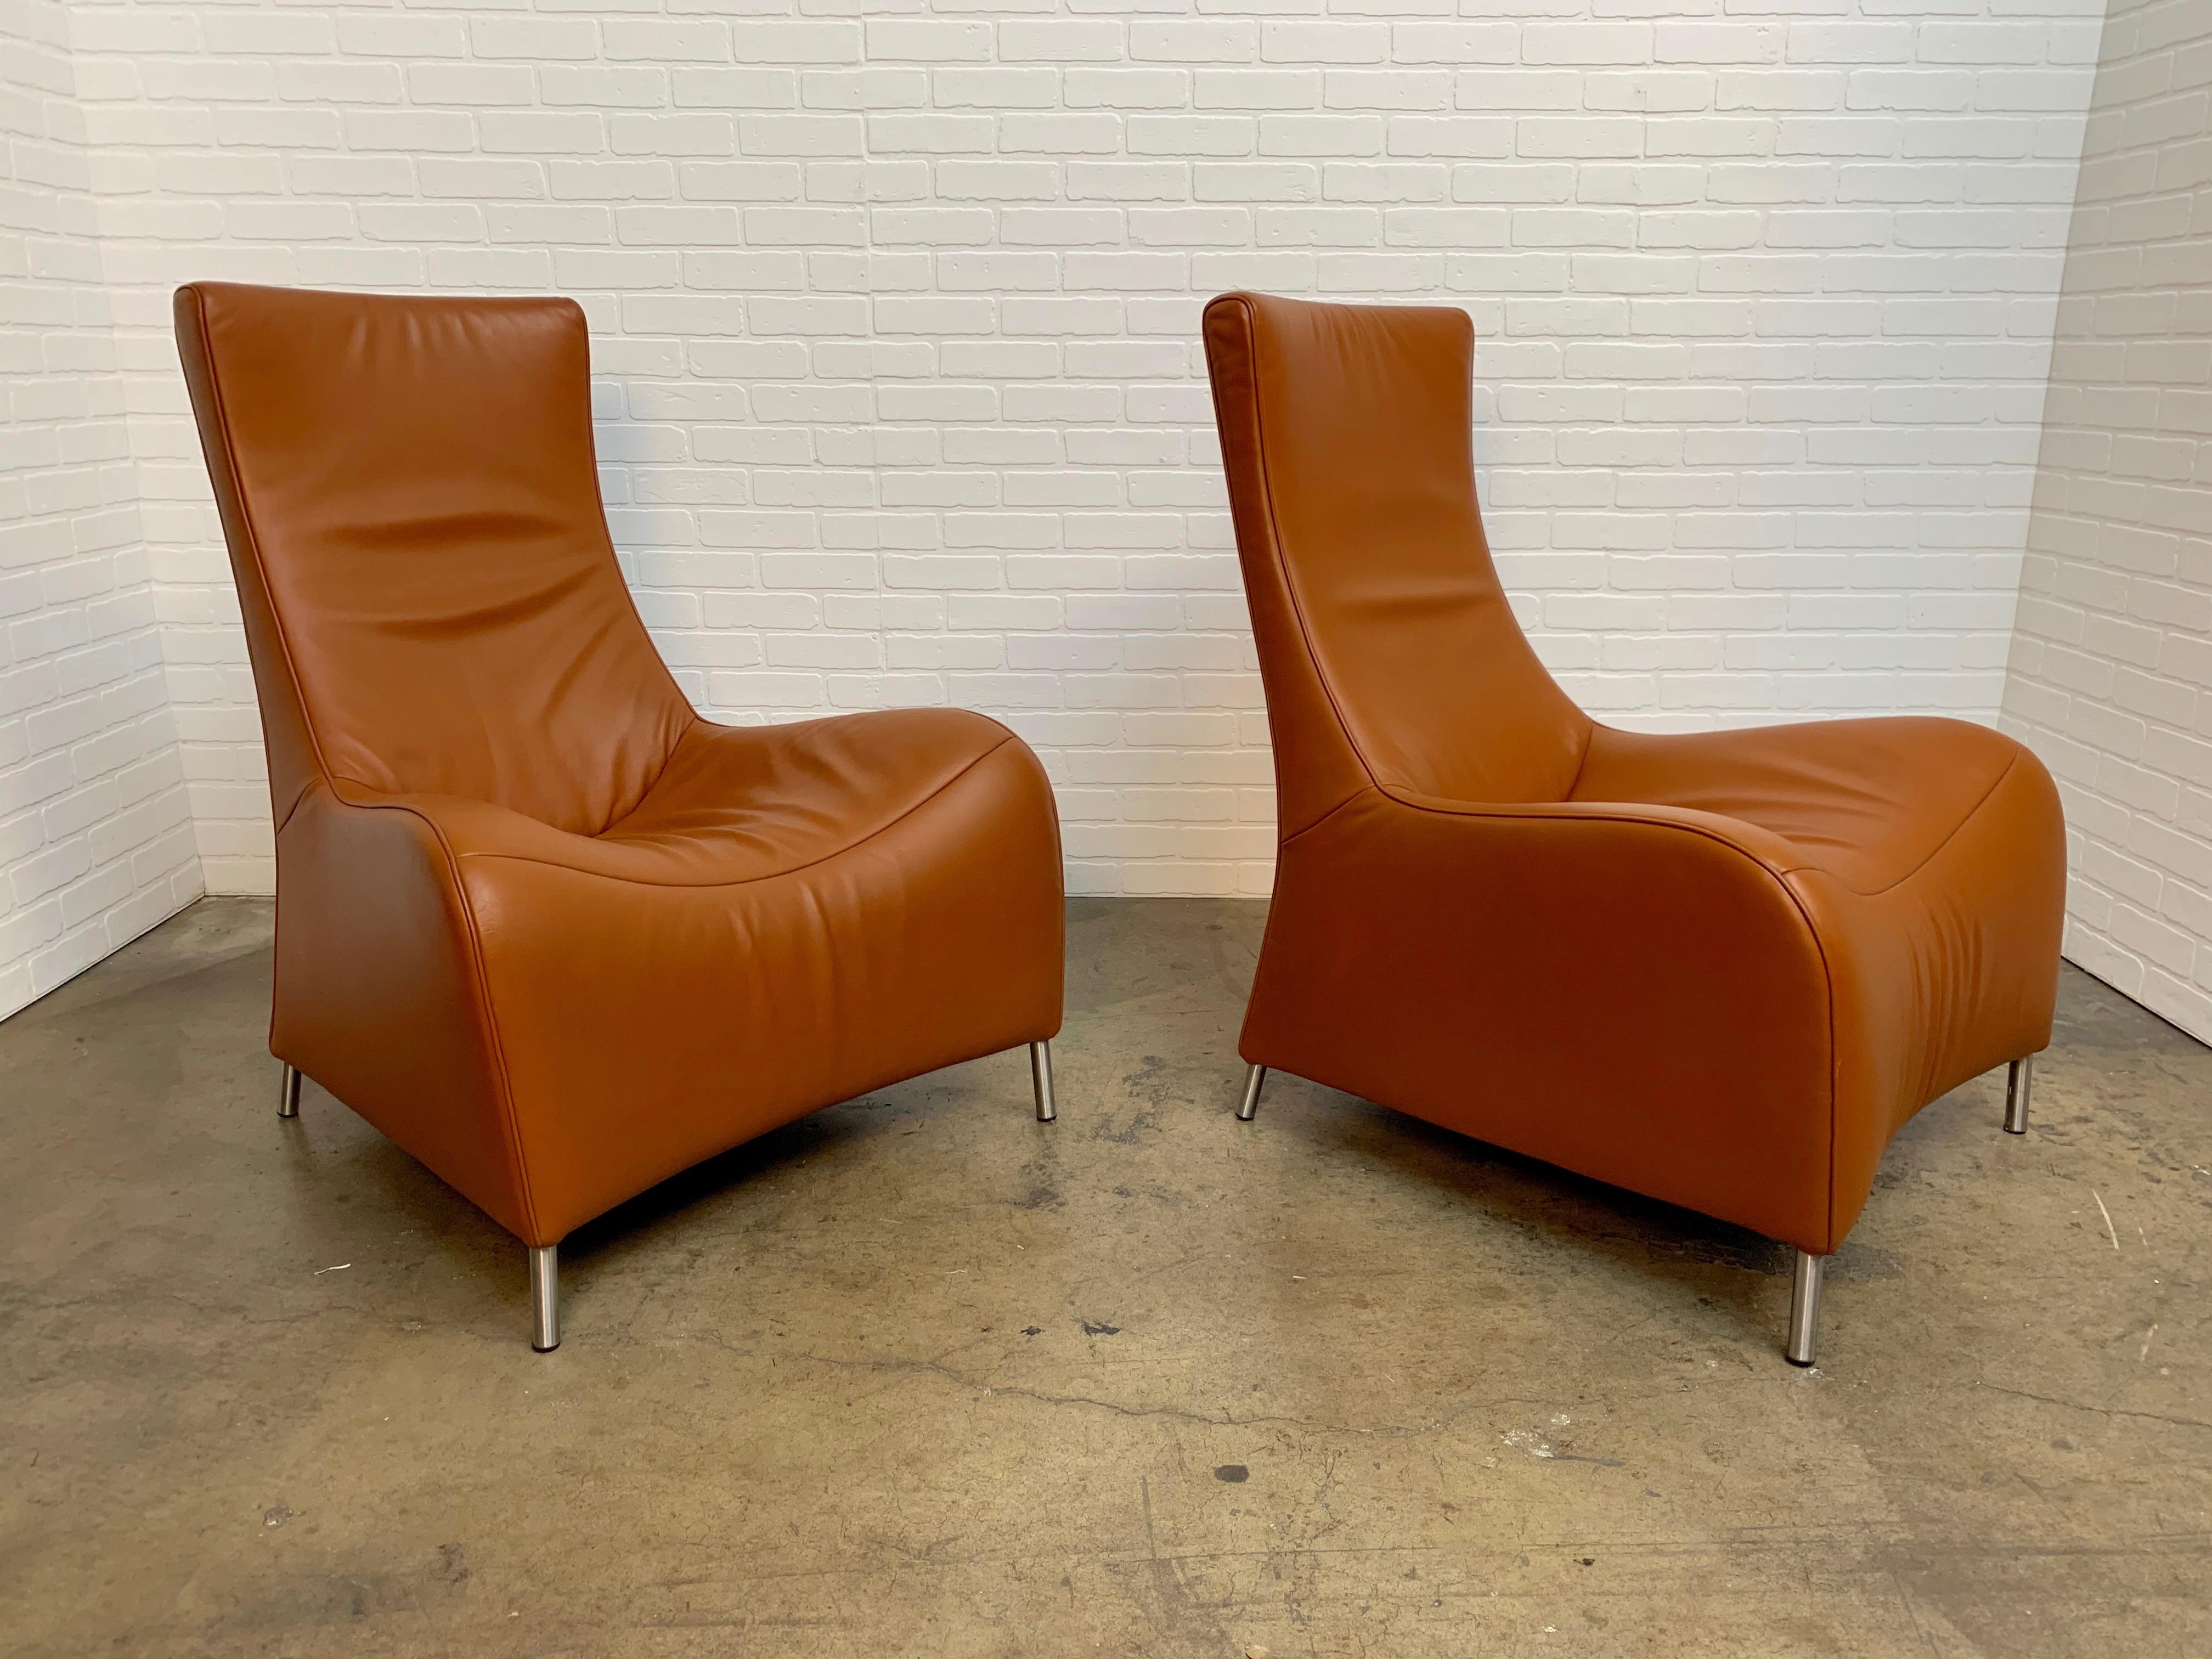 Designed by Matthias Hoffmann for De Sede. Saddle colored leather with stainless steel legs this pair of chairs is very comfortable.